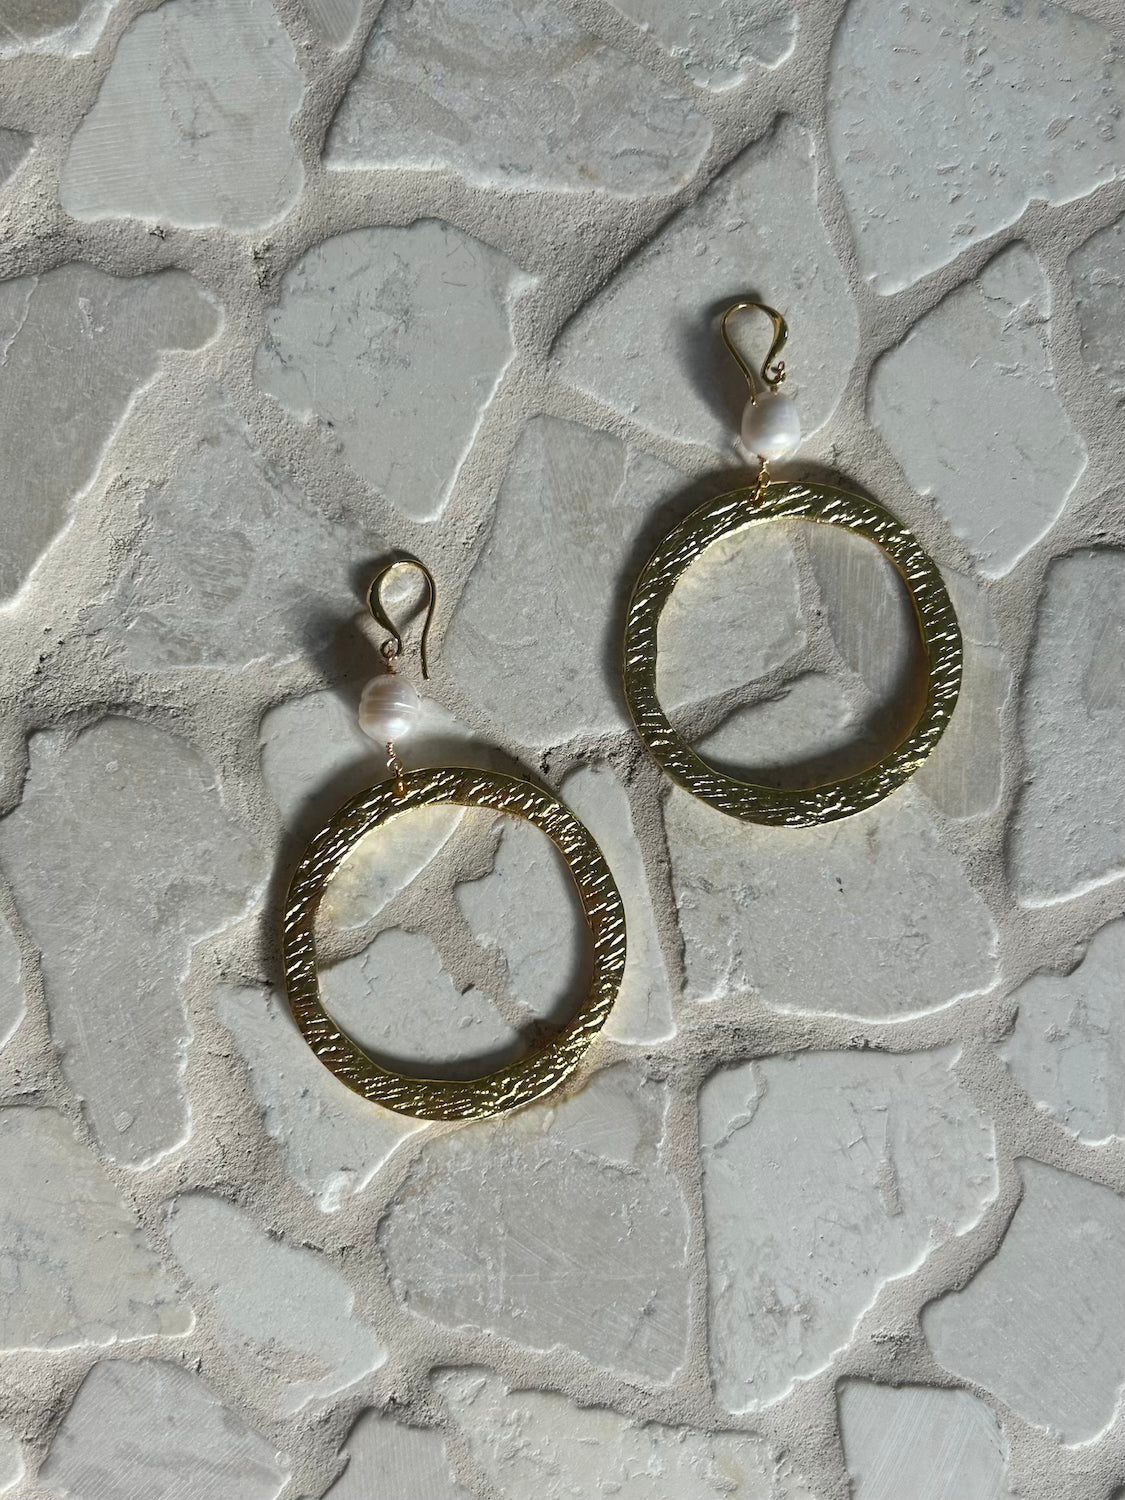 Golden Hour Hoops - large circle tampered shape earrings with pearl droplets - Malia Jewellery